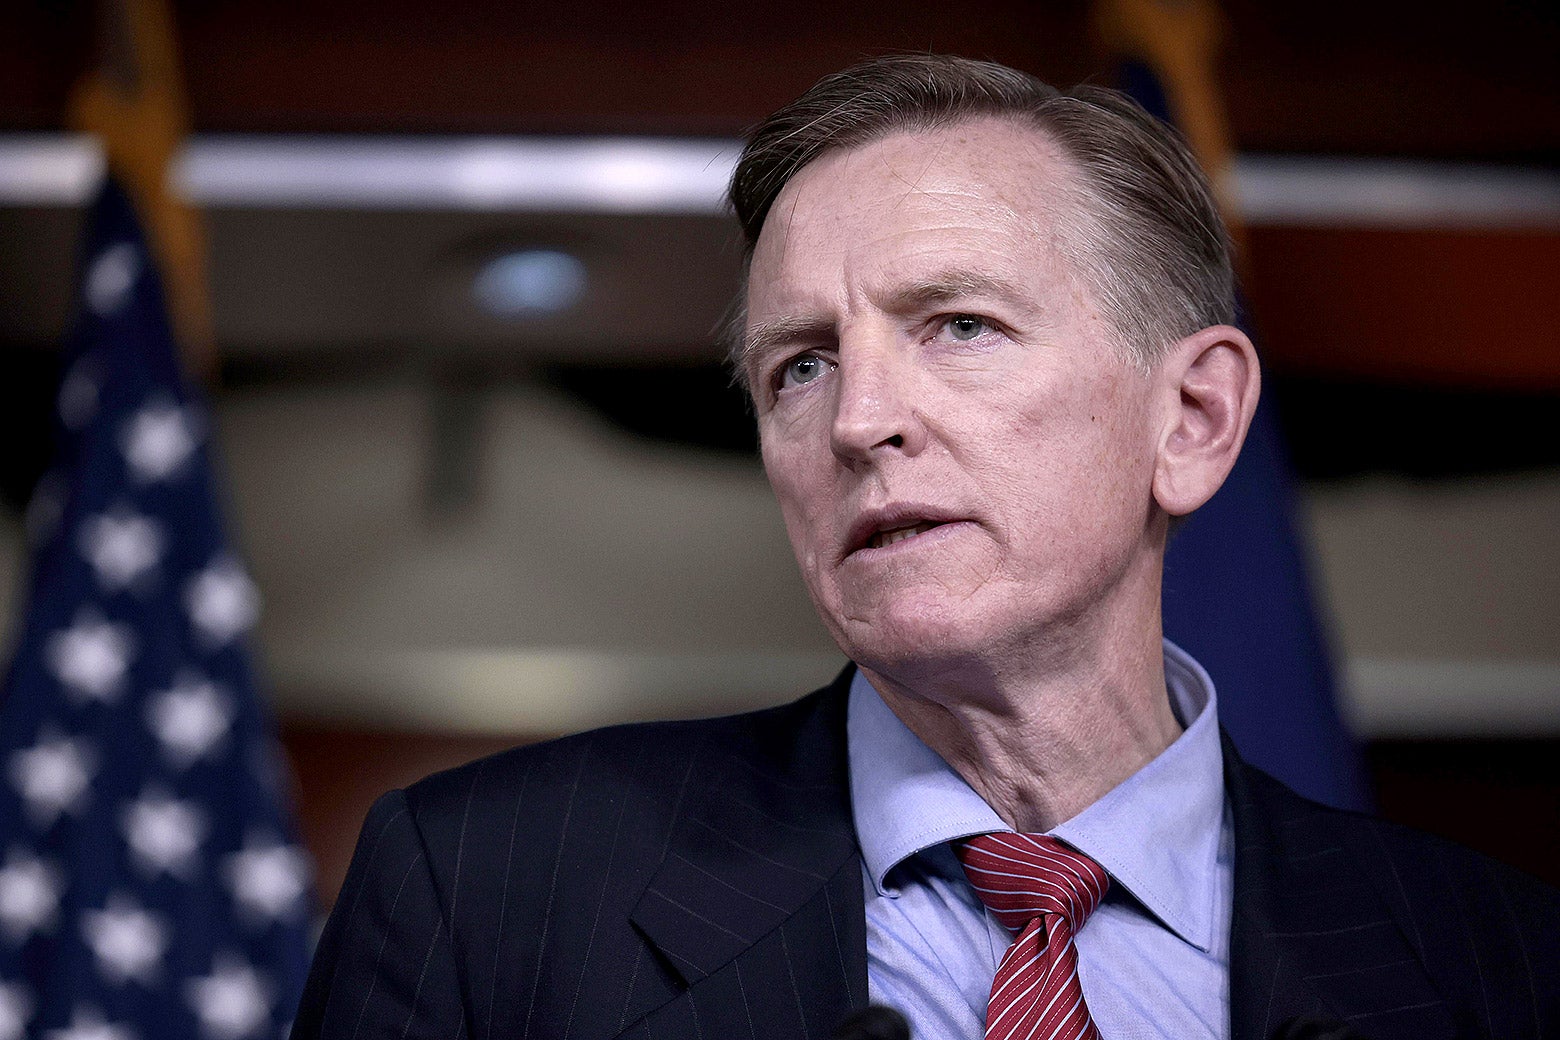 Gosar, wearing a suit jacket, a blue shirt, and a red-striped tie, speaks in front of an out-of-focus American flag.